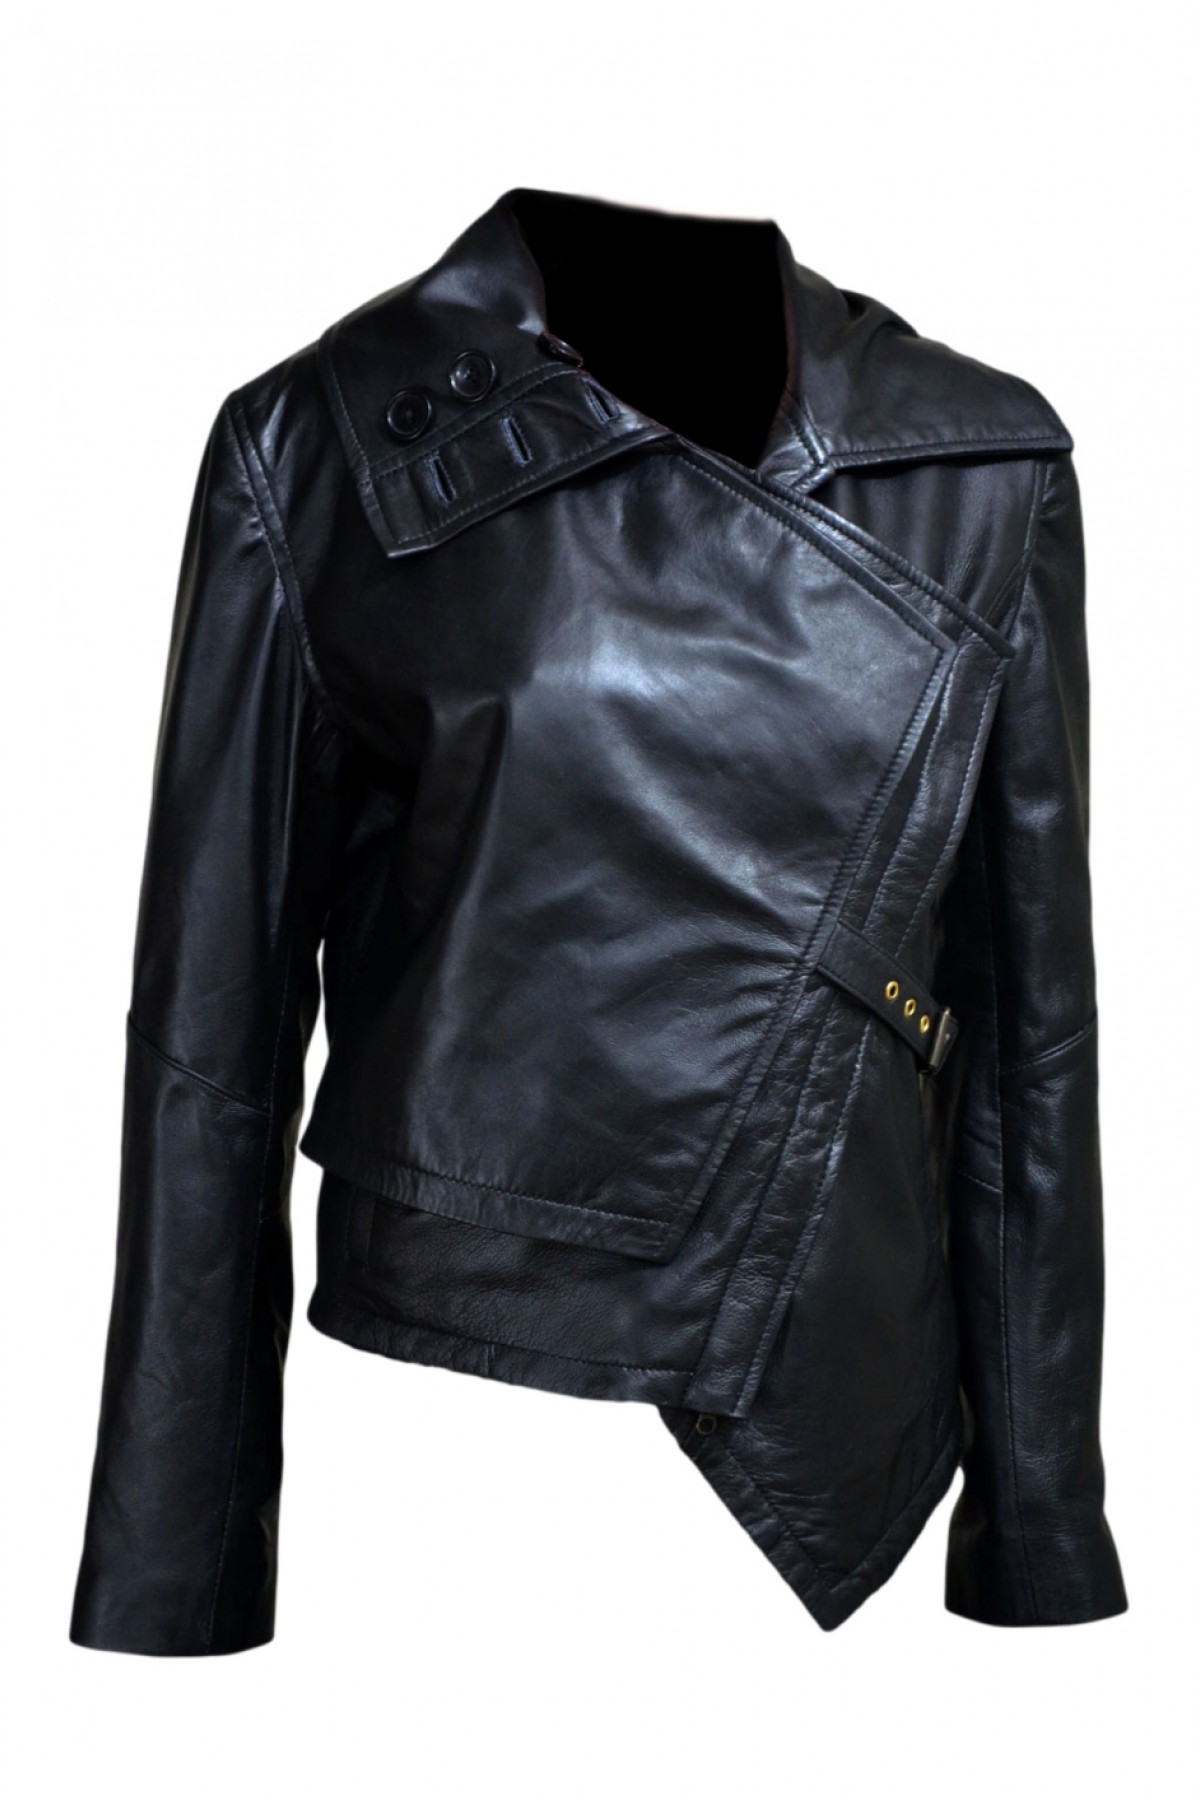 Katniss Everdeen The Hunger Games Catching Fire Black Leather Jacket